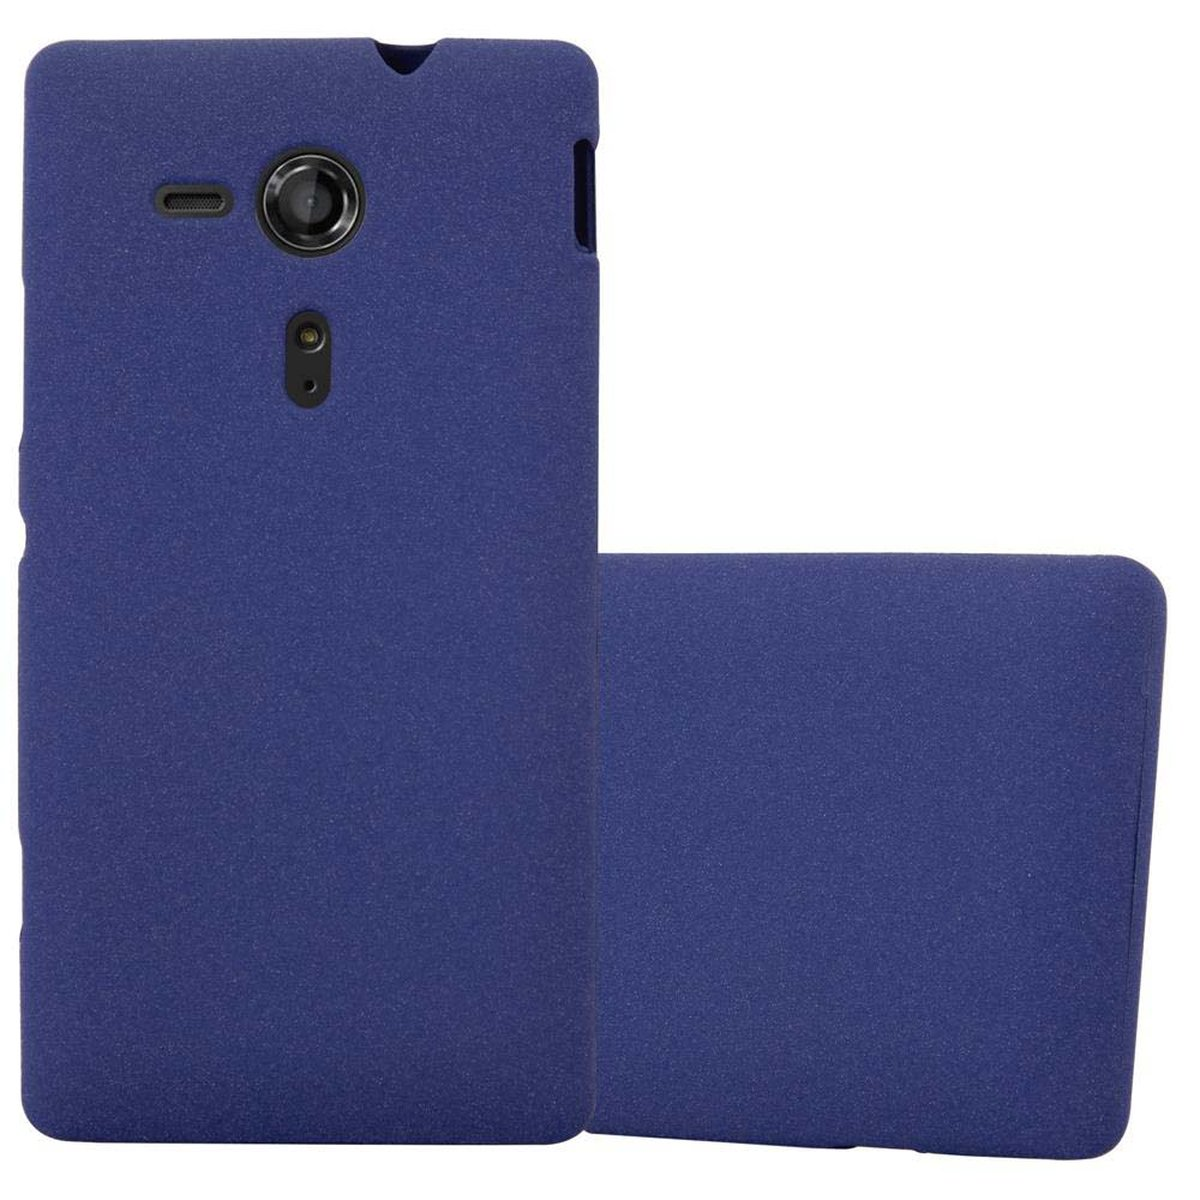 CADORABO TPU Frosted SP, Schutzhülle, FROST Backcover, Xperia BLAU DUNKEL Sony